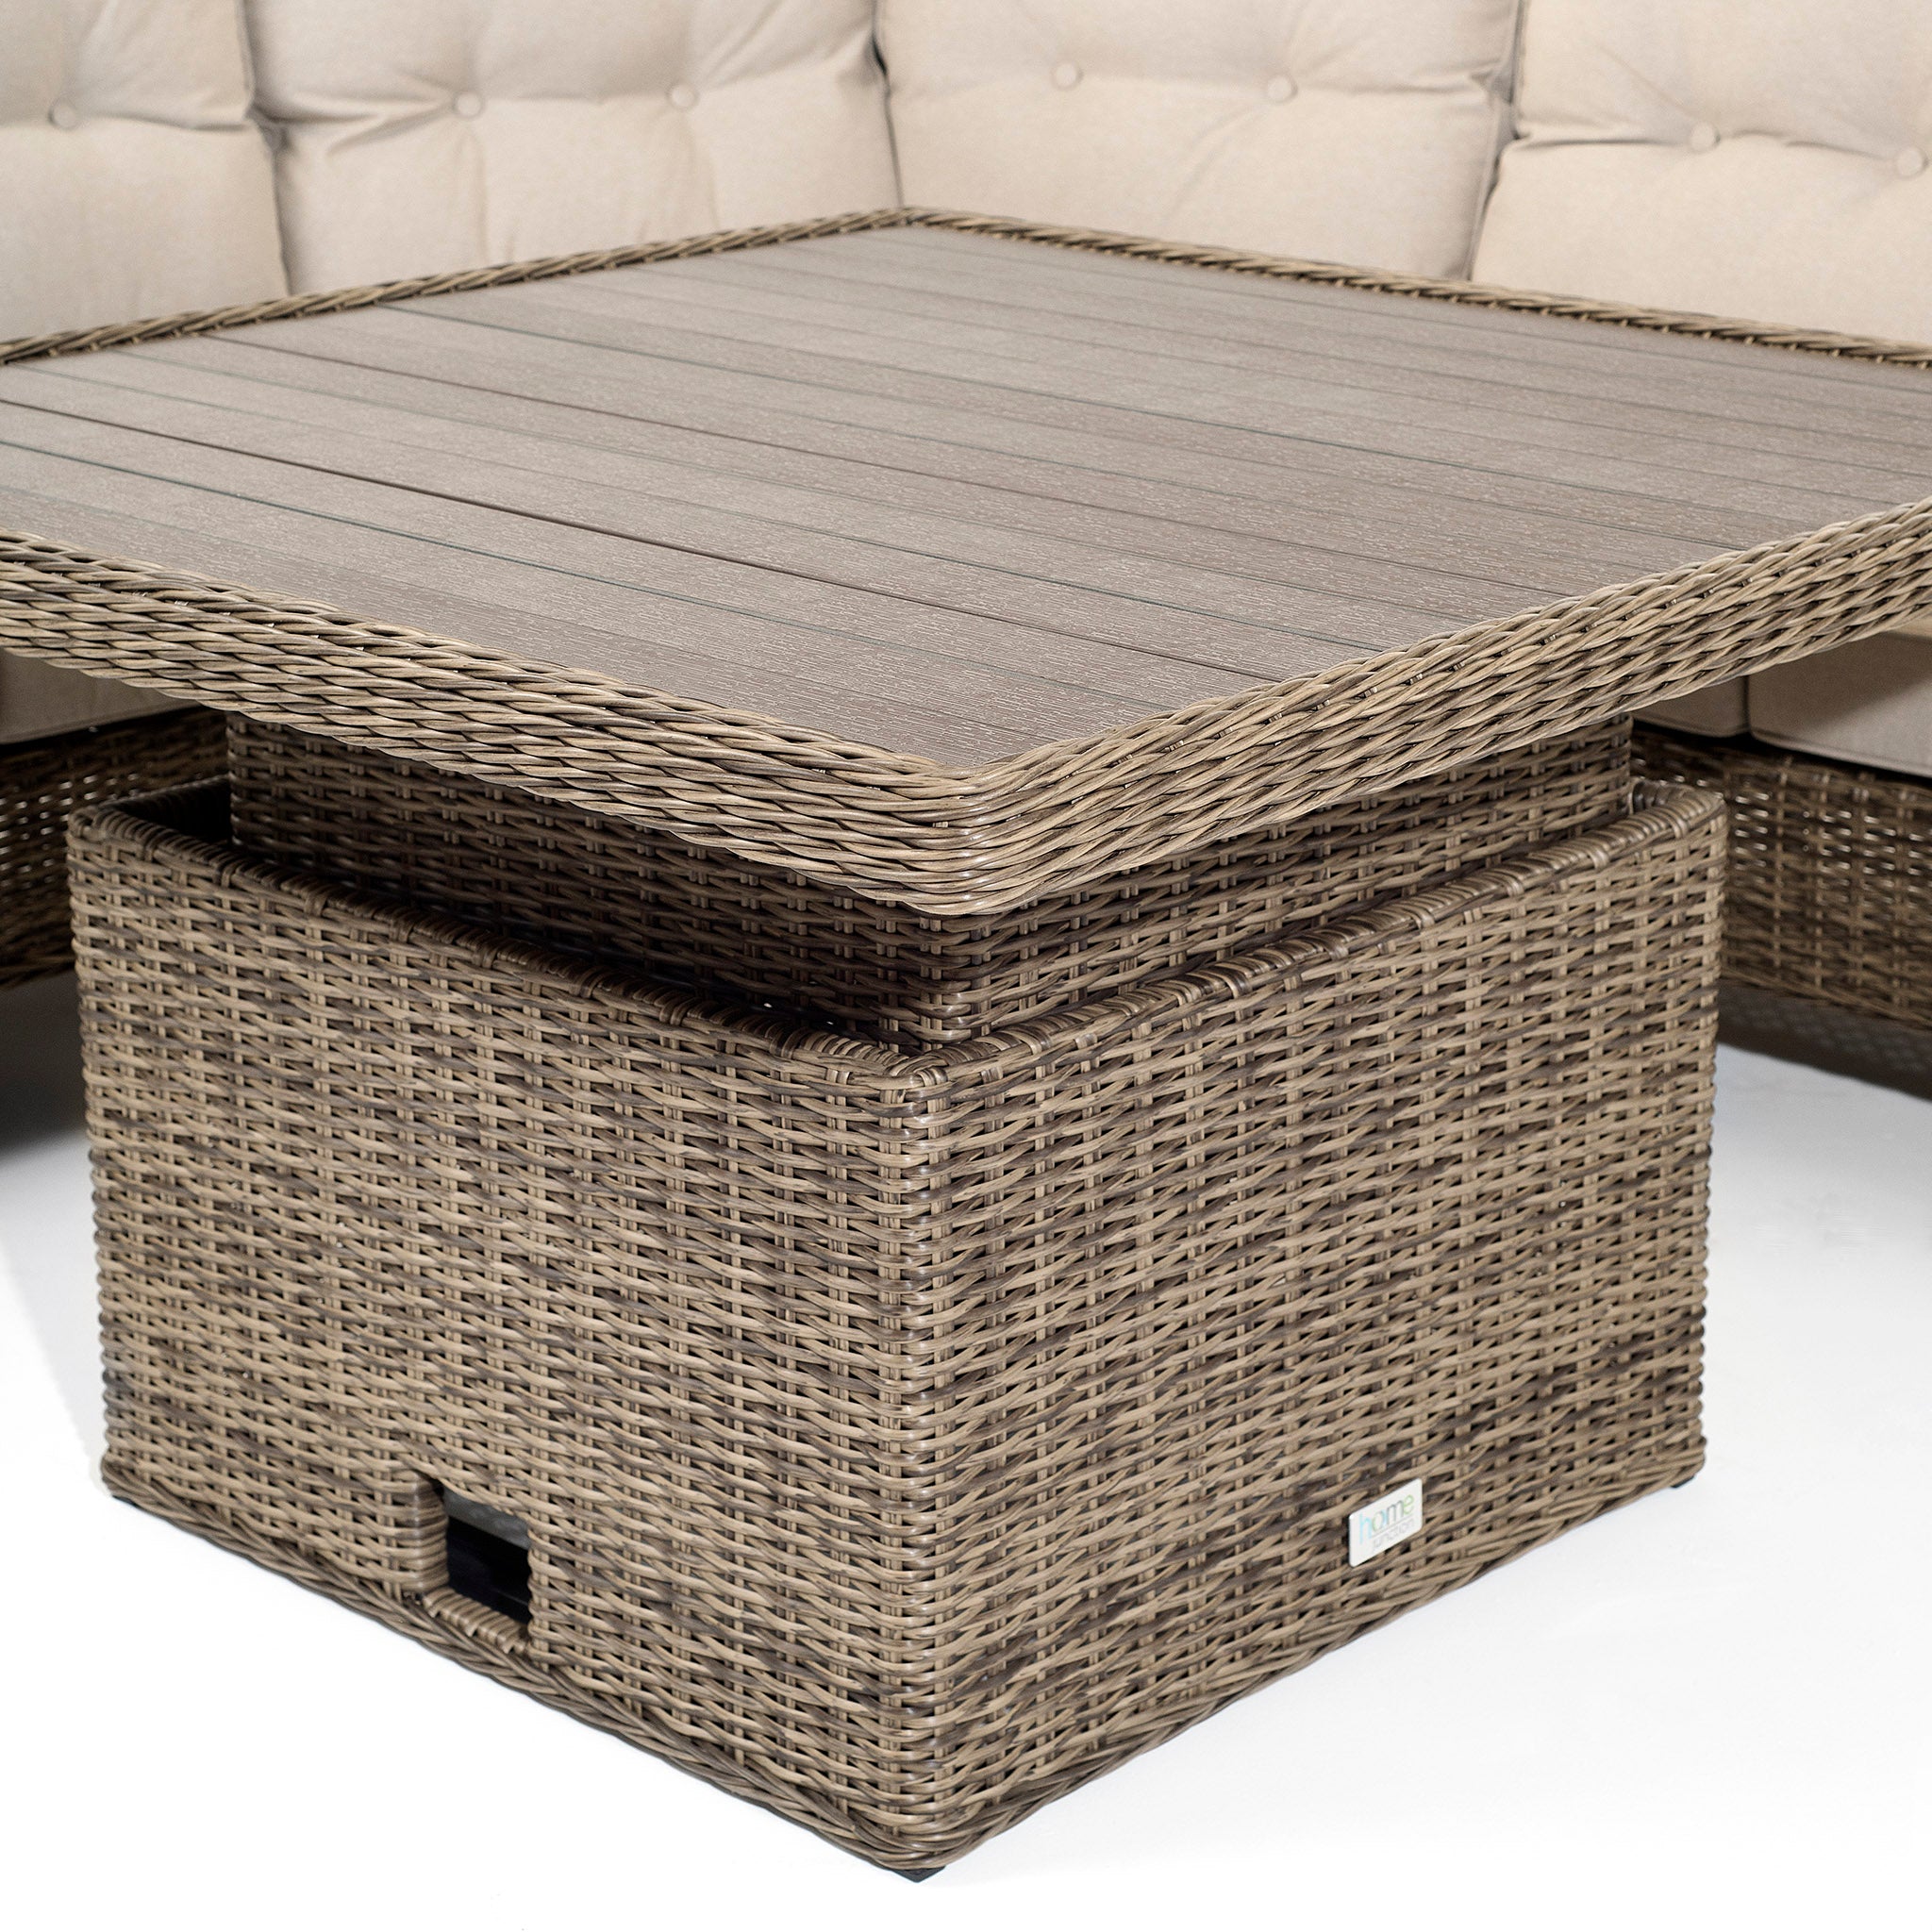 Hazz Corner Sofa with Rising Table and 2 Benches in Brown Rattan - Italiancityfurniture